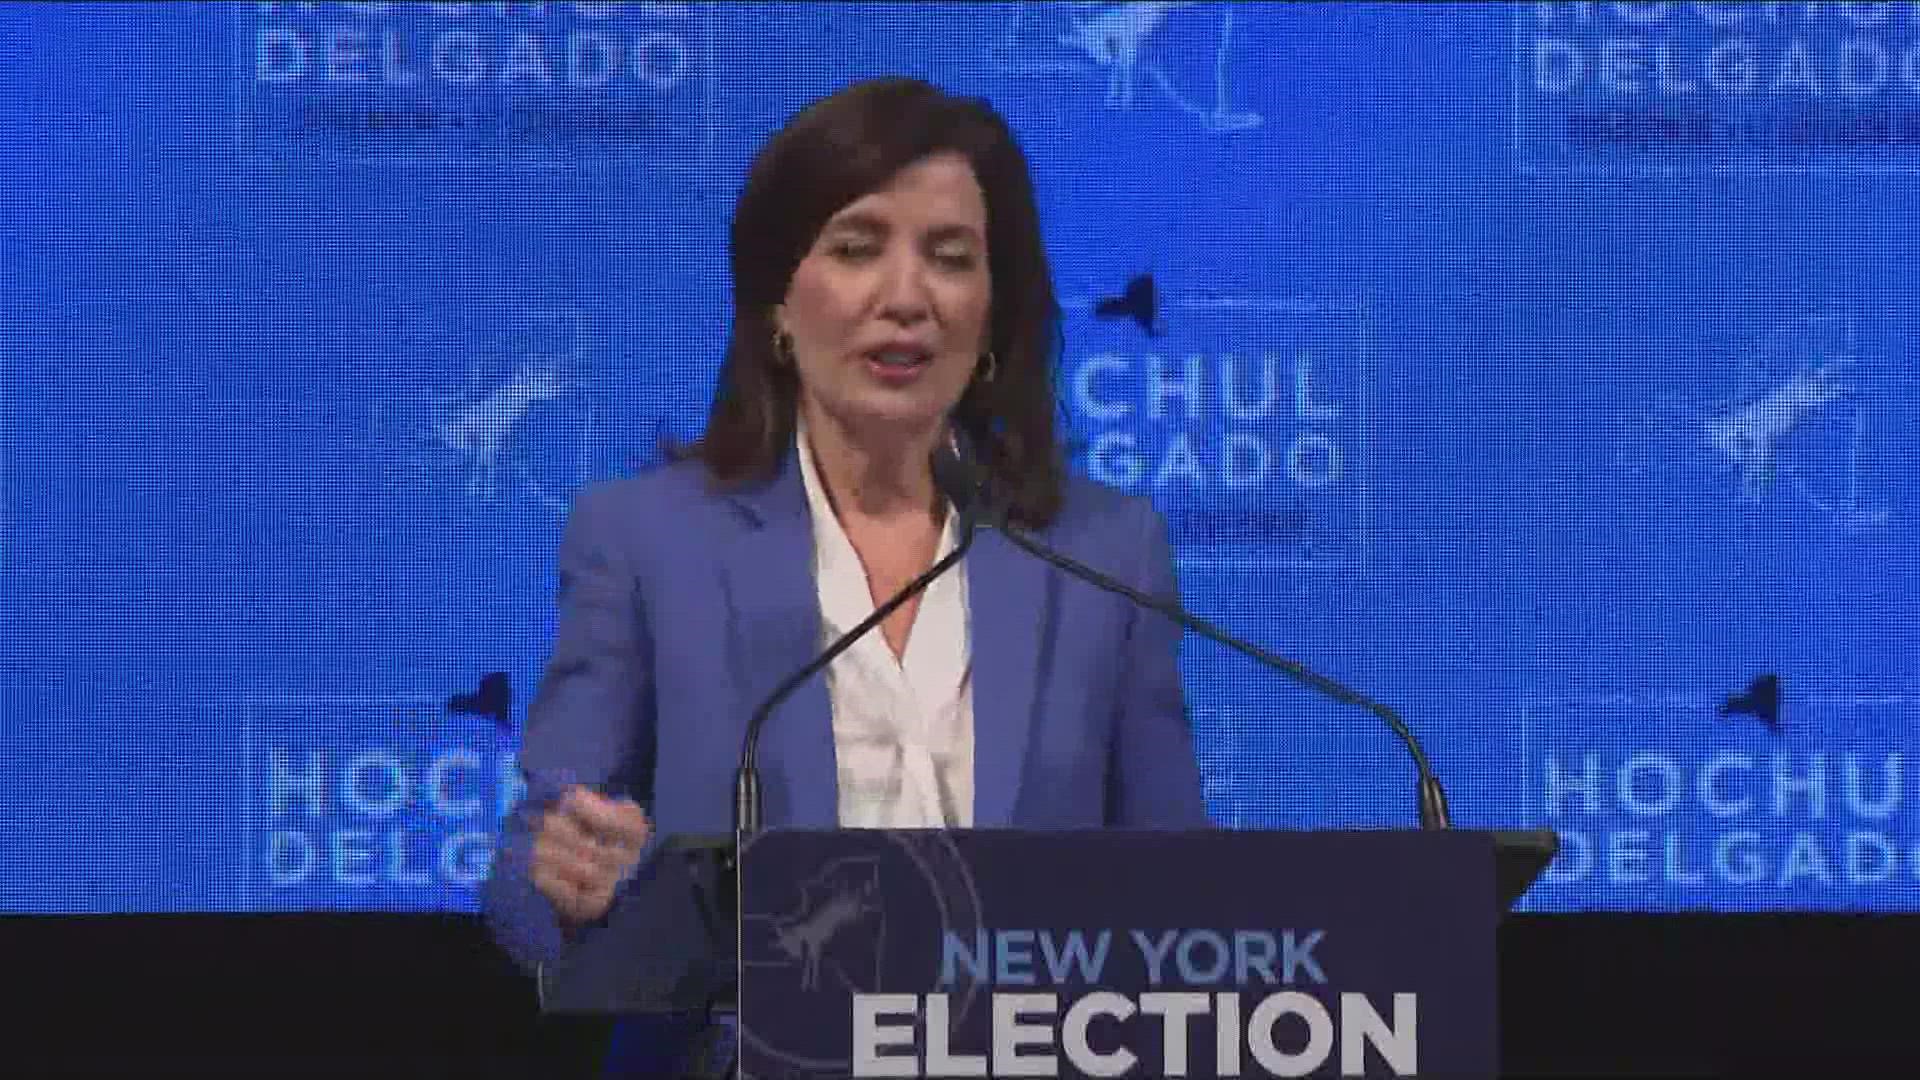 Kathy Hochul became the first woman elected as Governor of New York